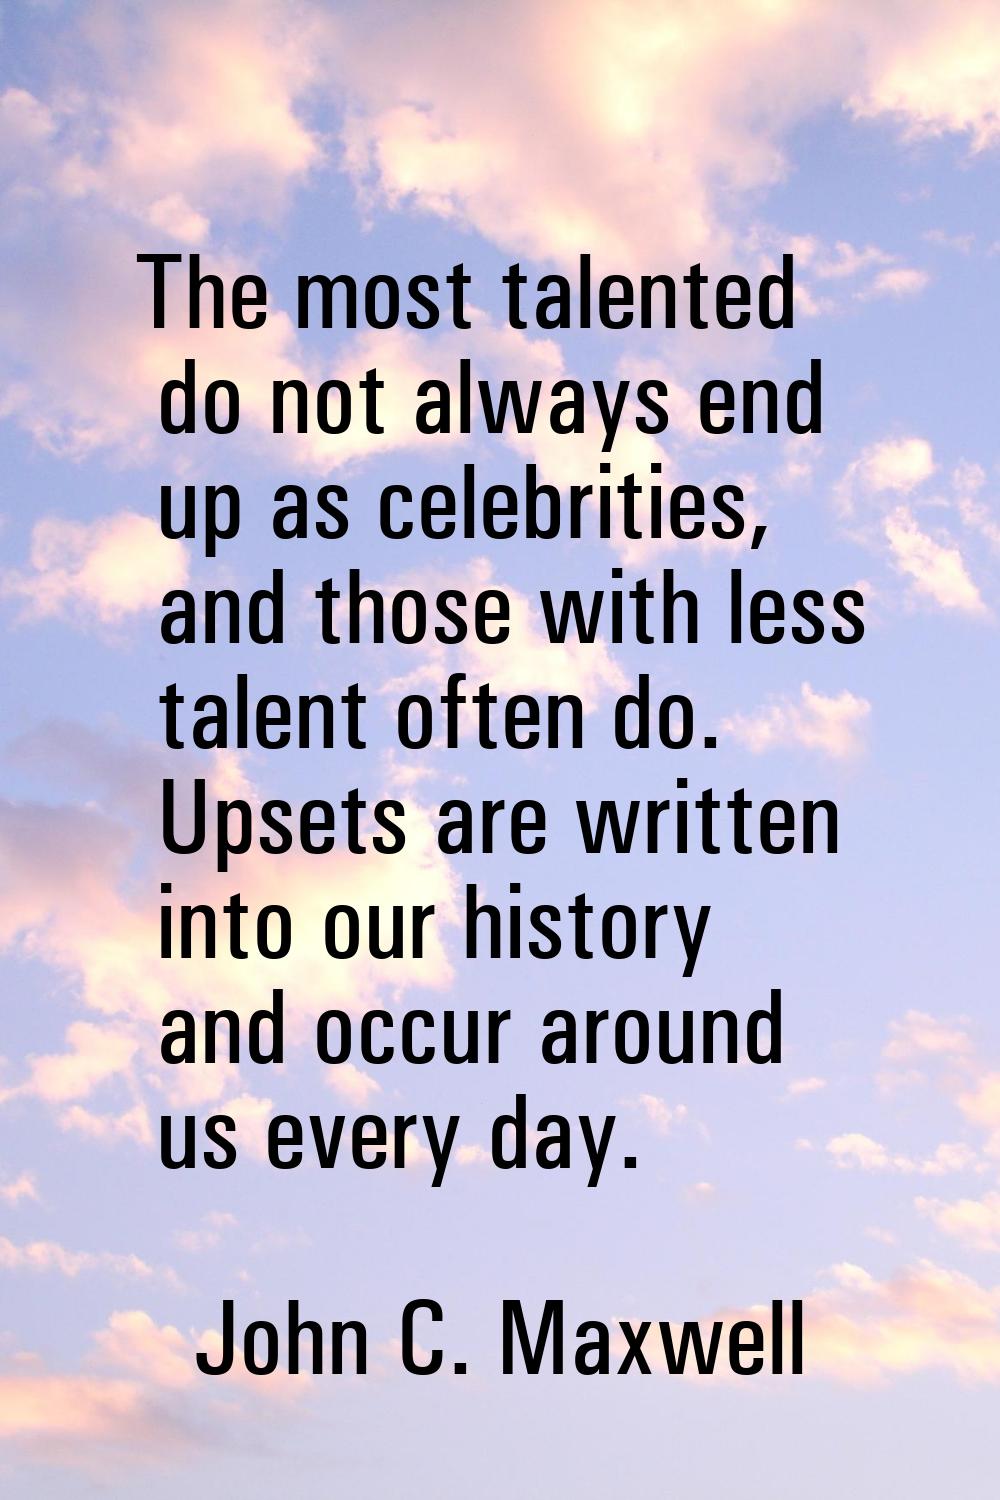 The most talented do not always end up as celebrities, and those with less talent often do. Upsets 